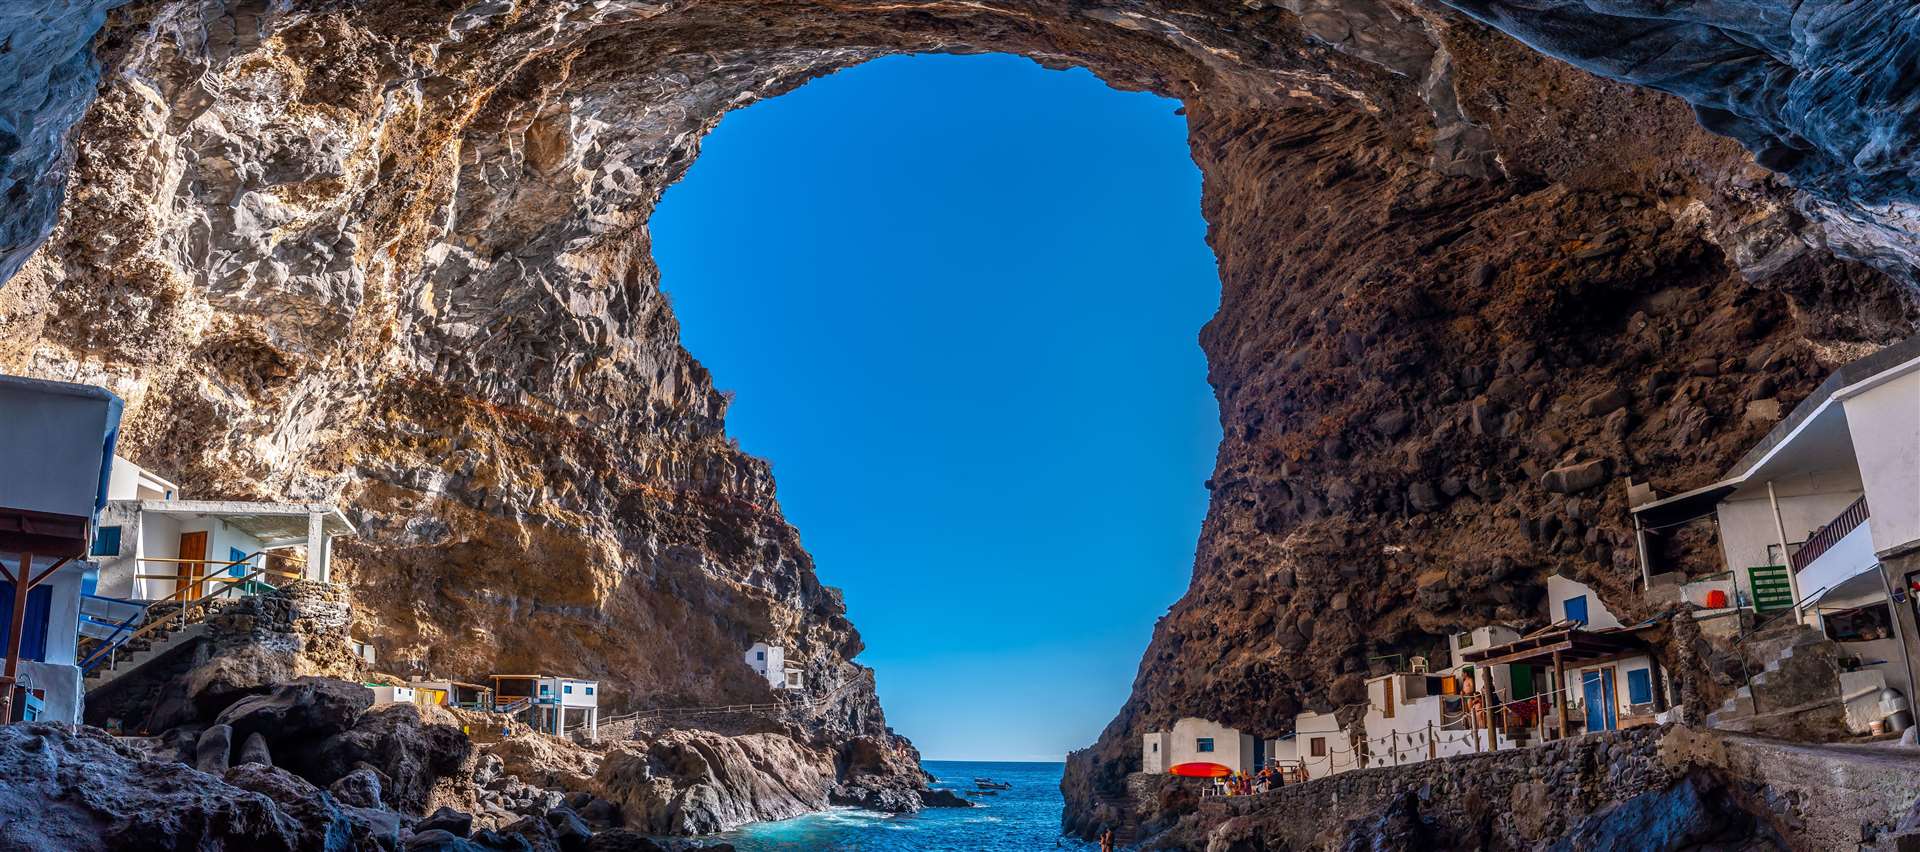 Panoramic view from the spectacular interior of the cave of the town of Poris de Candelaria on the north-west coast of the island of La Palma, Canary Islands. Spain.